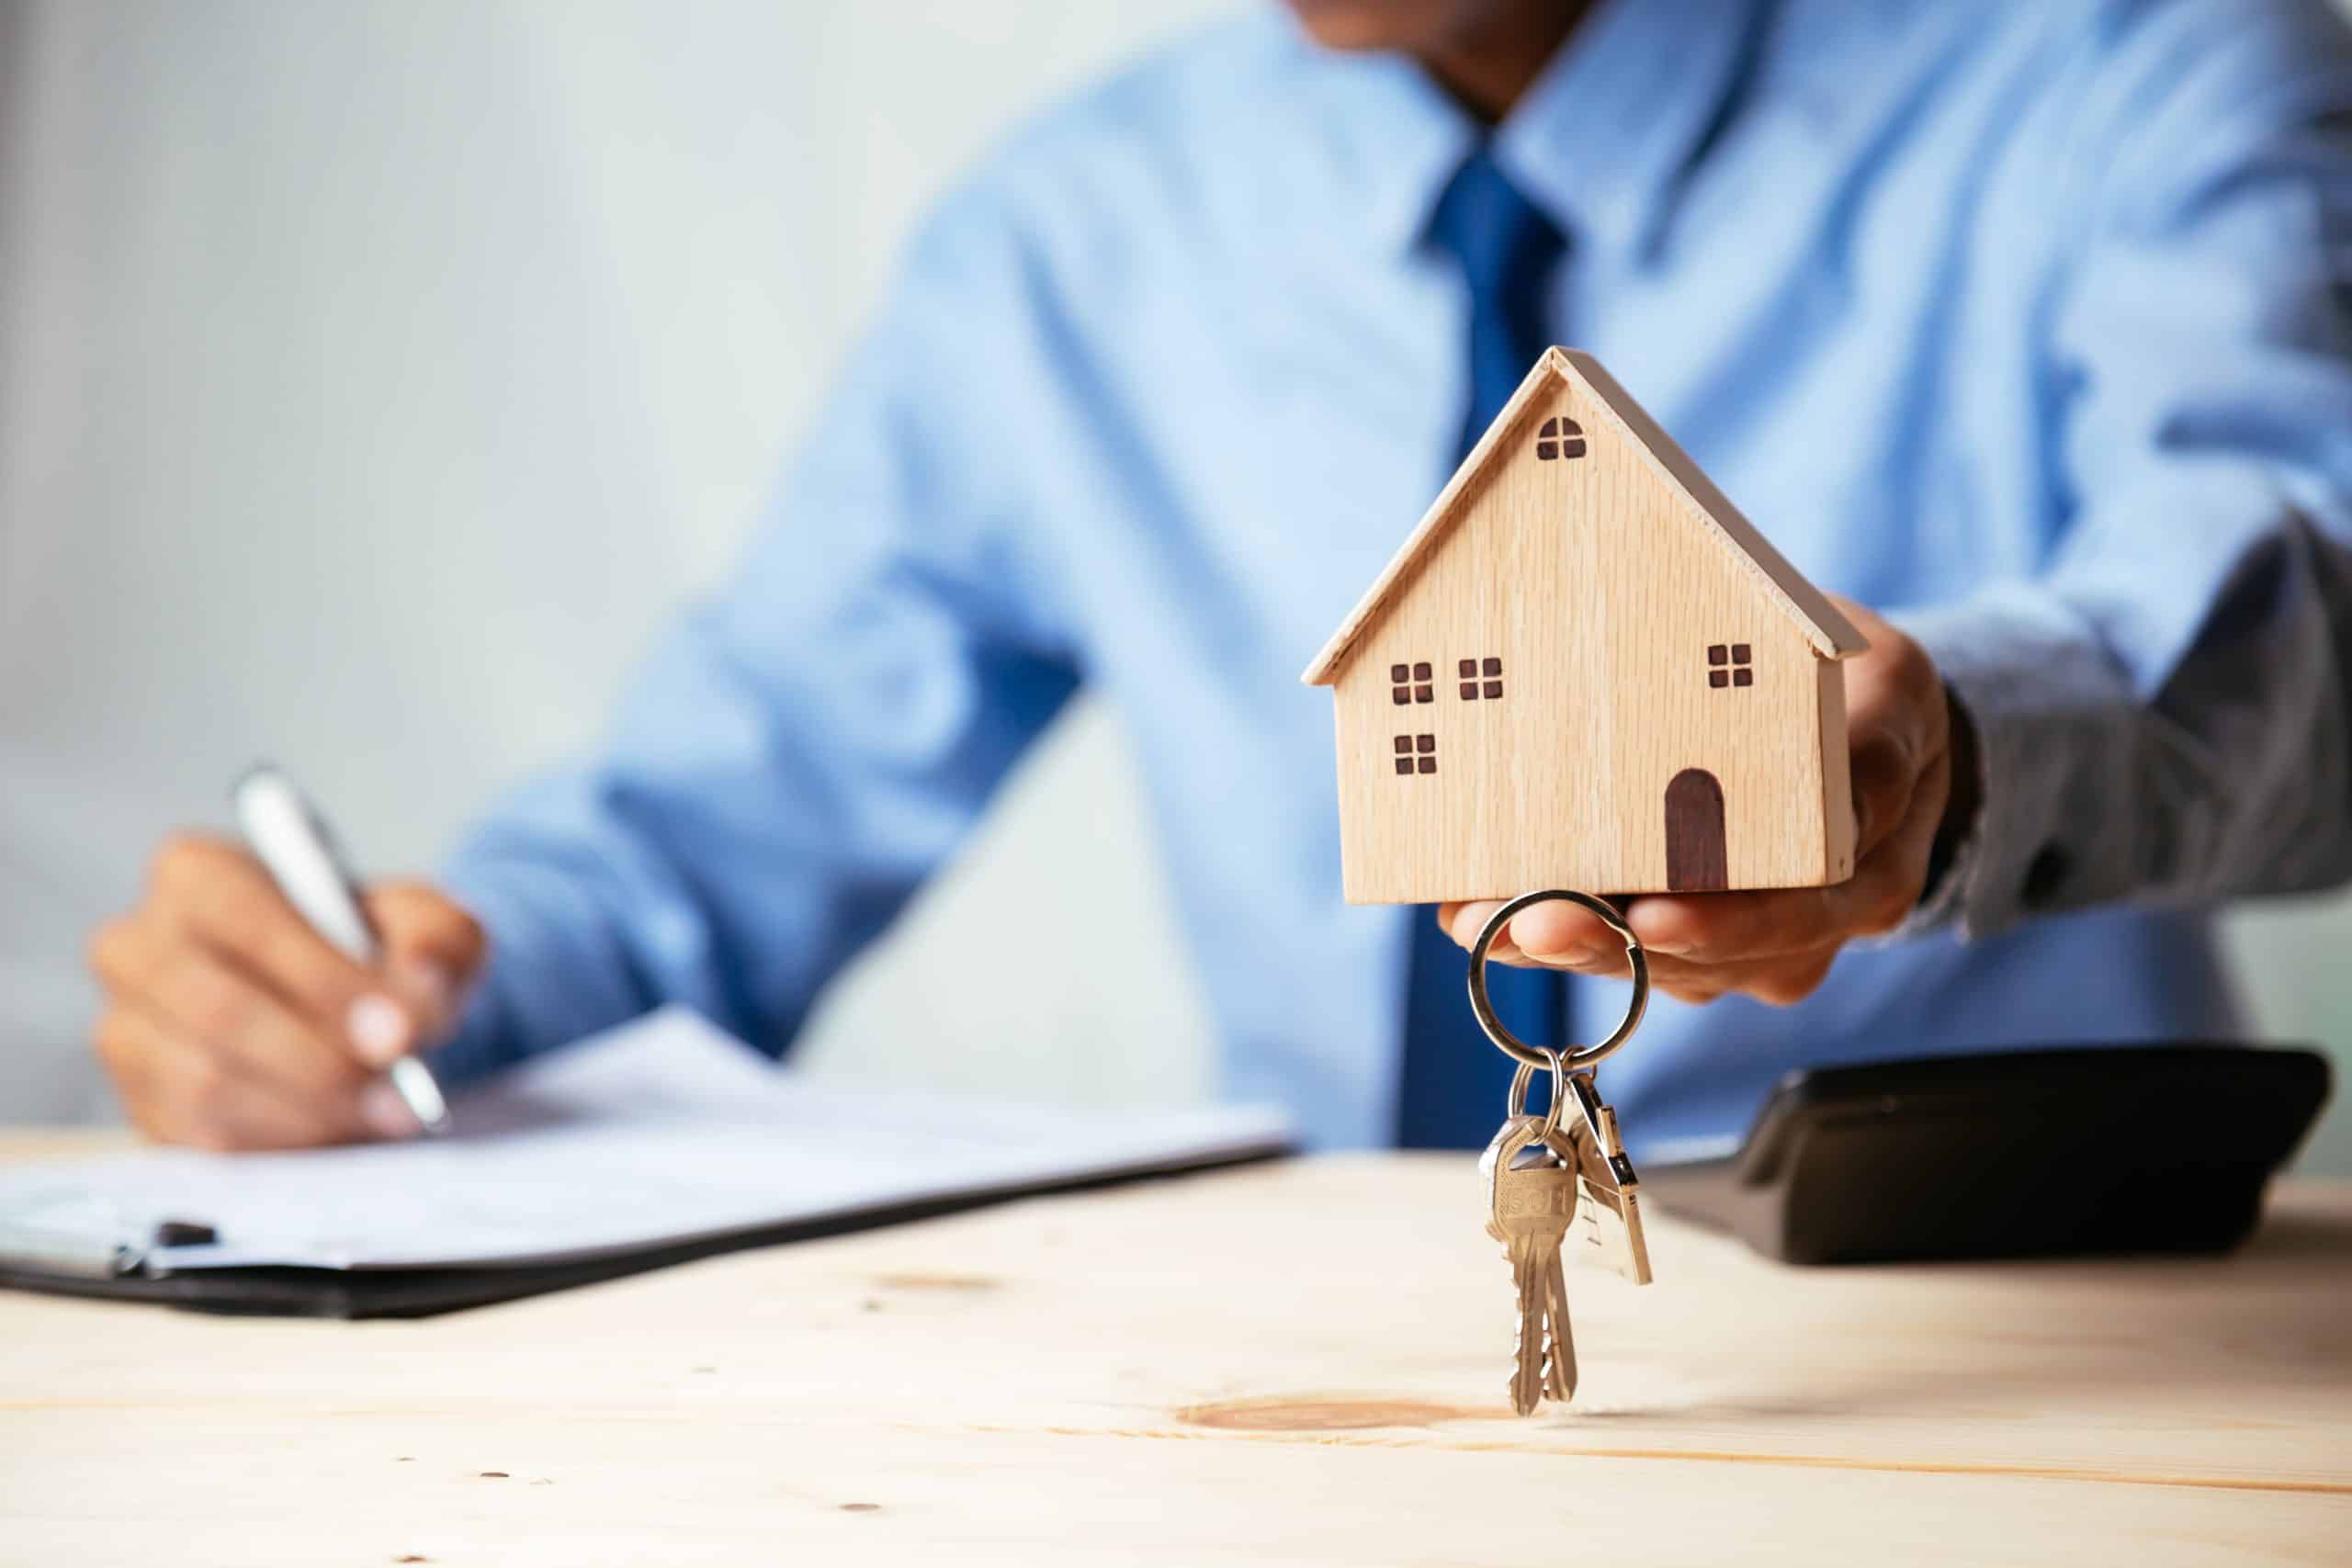 Storage Letchworth UK - image shows a man holding a wooden house model and keys to a new home he is wearing a blue shirt and tie, sitting at a desk with one hand holding a pen and signing a paper